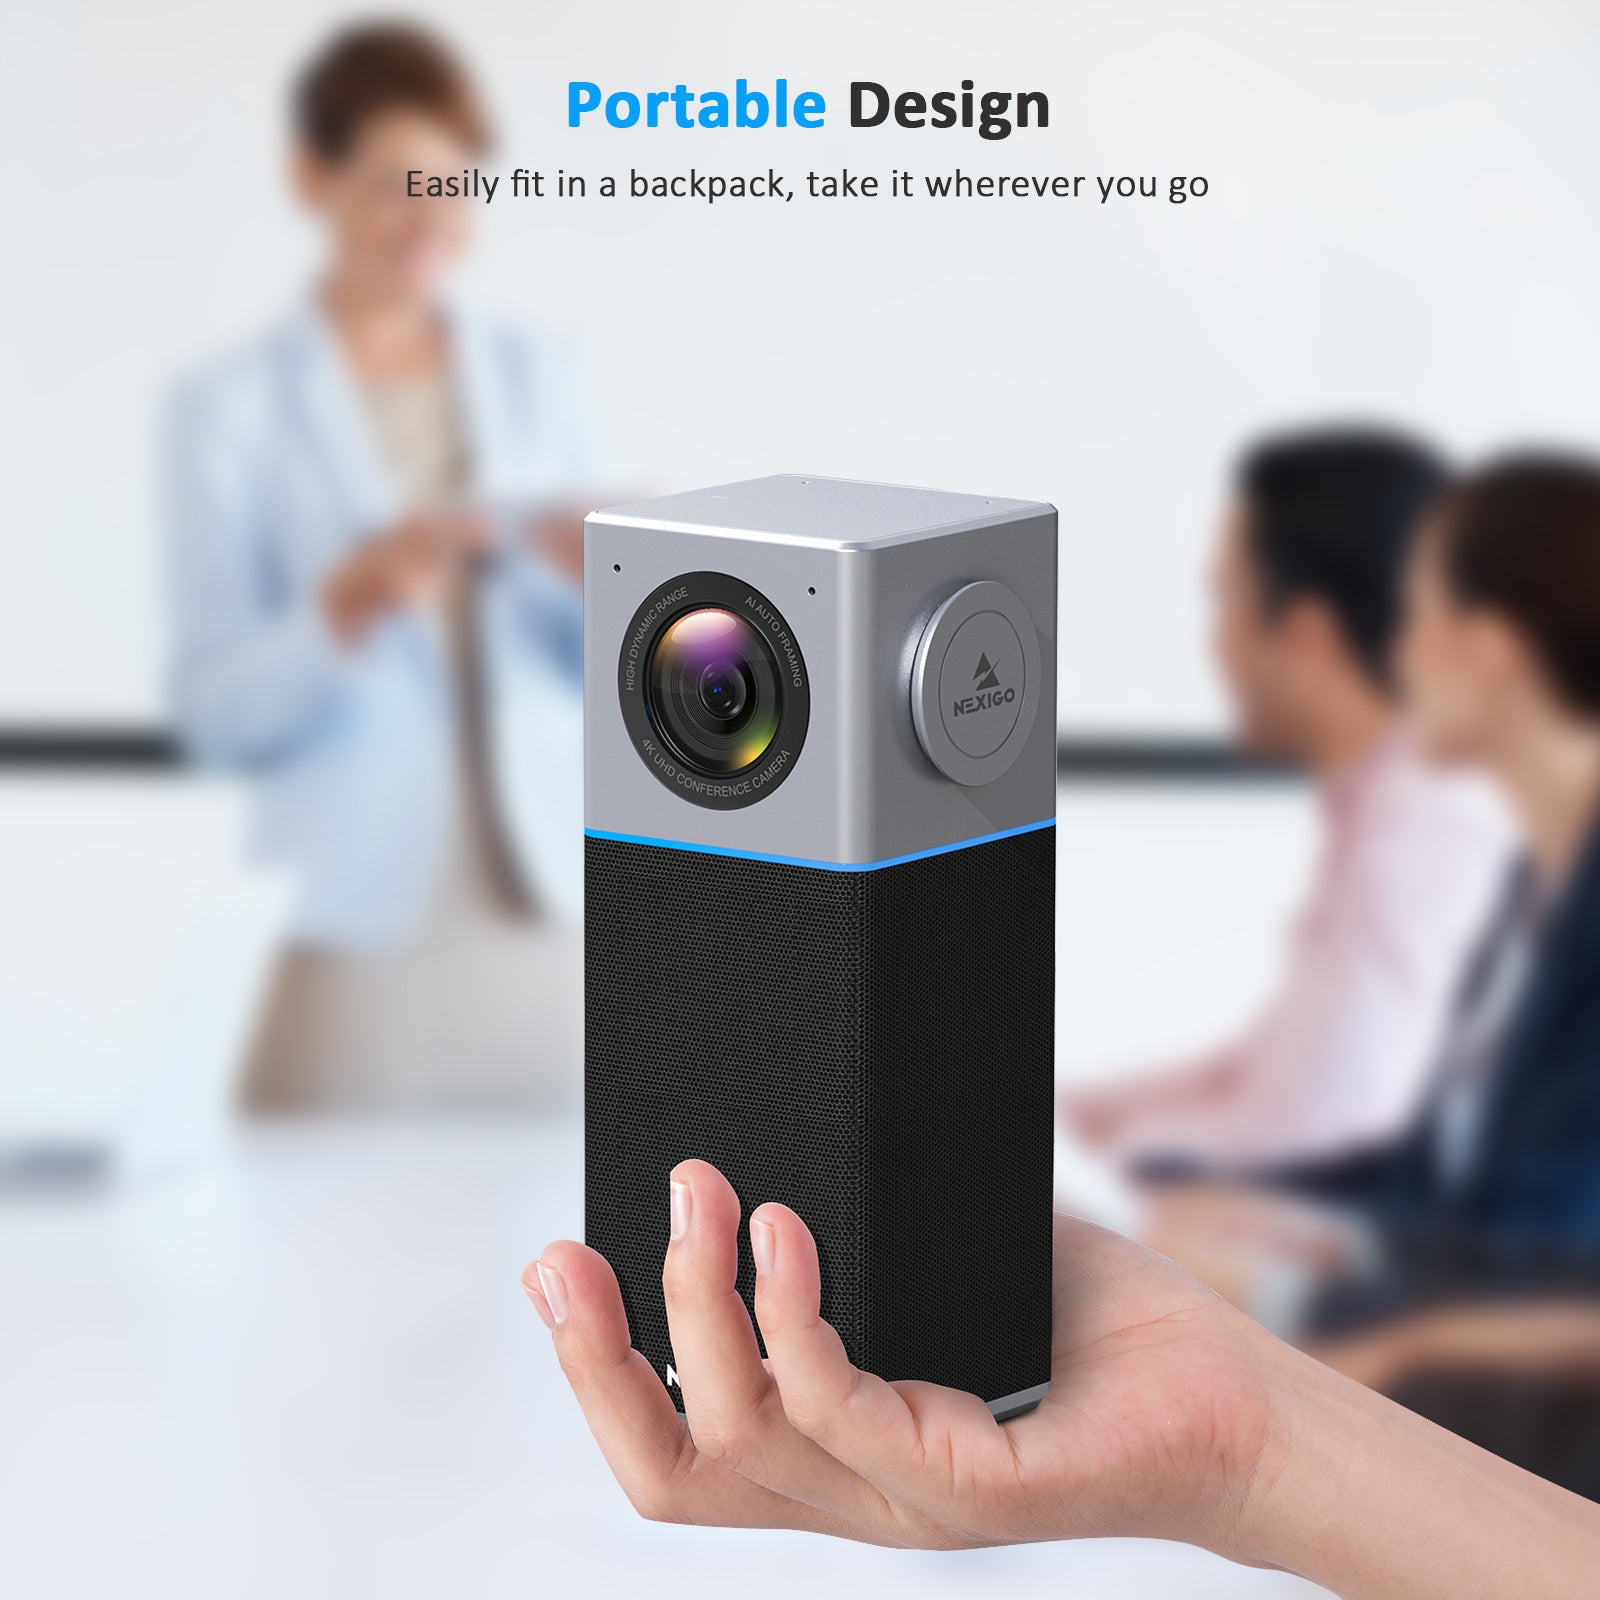 The Conference Camera is compact, lightweight, and easy to carry, fits comfortably in one hand.